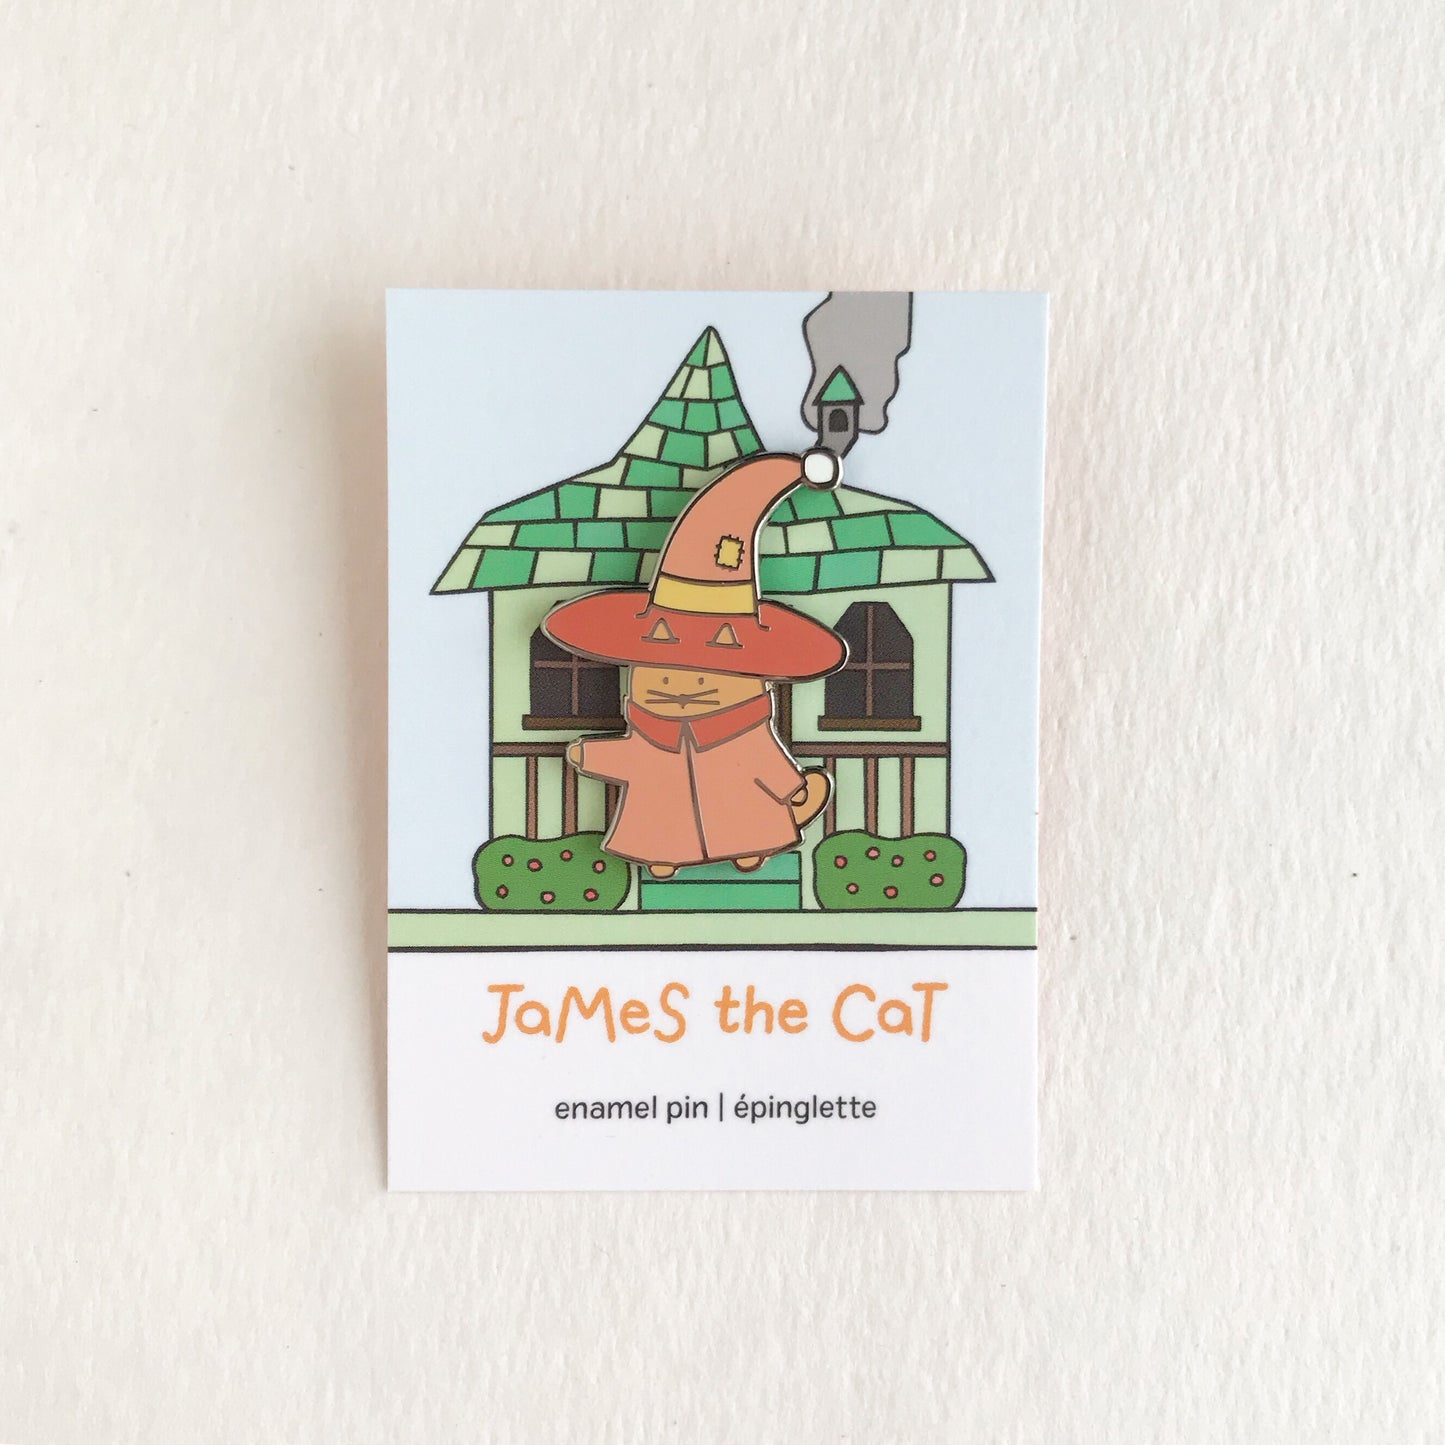 James the Cat - James the Mage